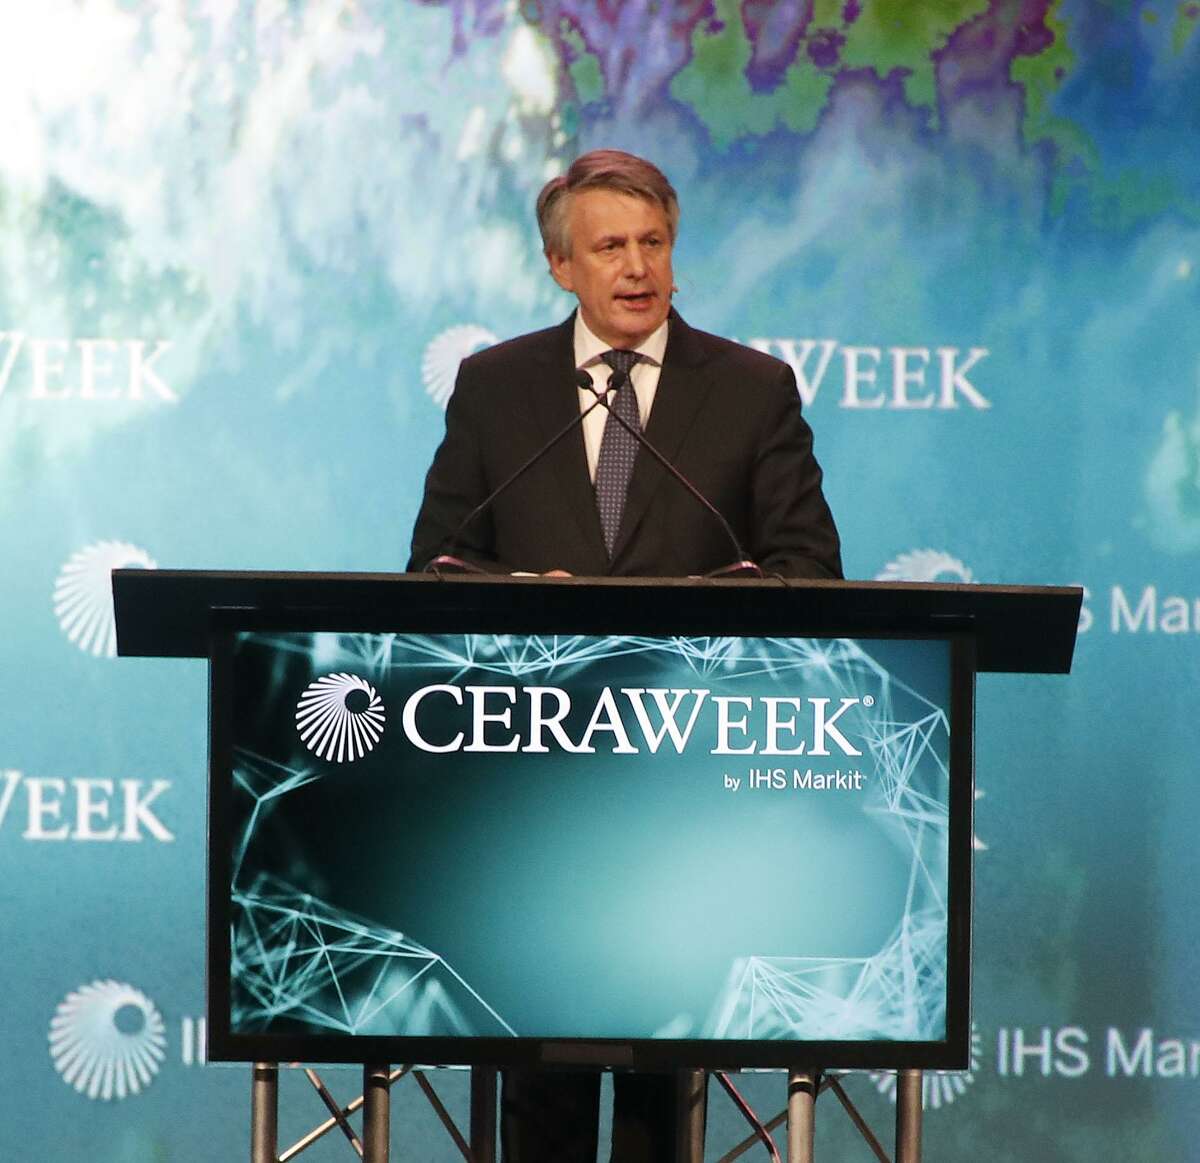 Royal Dutch Shell CEO Ben van Beurden speaks at the CERAWeek conference at the Hilton Americas, Wednesday, March 7, 2018, in Houston. ( Karen Warren / Houston Chronicle )